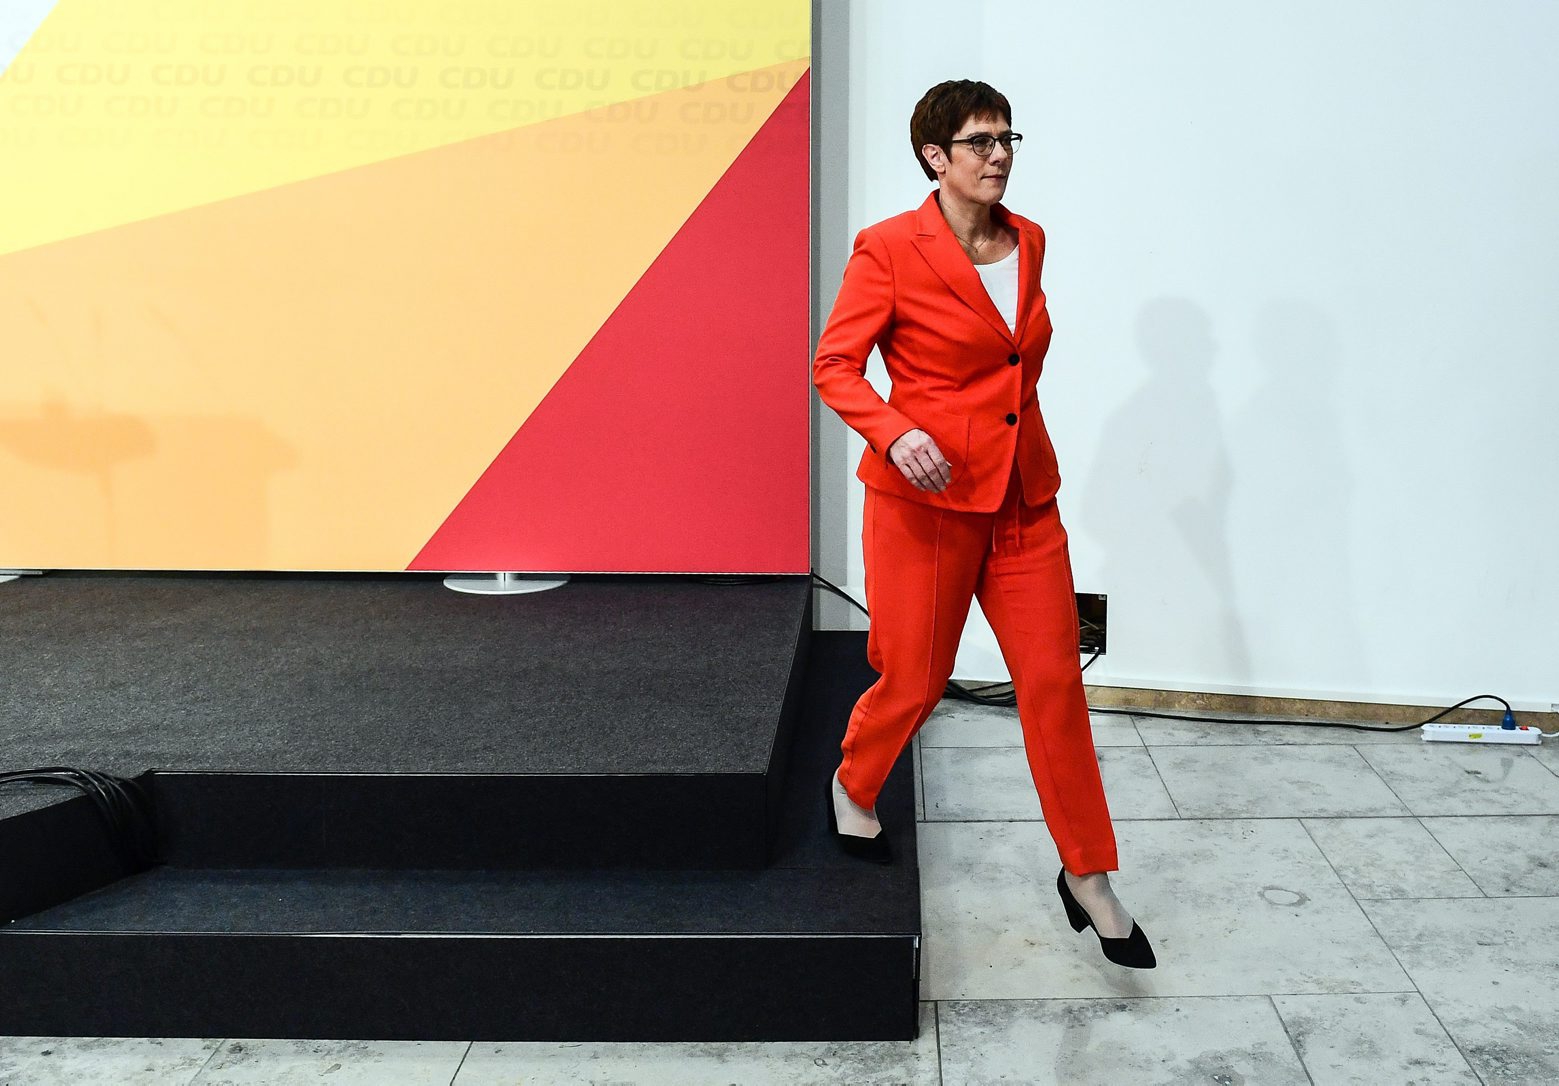 epa08200121 Christian Democratic Union (CDU) party chairwoman and German Defense Minister Annegret Kramp-Karrenbauer gives a press conference at the party headquarters in Berlin, Germany, 07 February 2020. German political parties CDU and FDP hold meetings after the Thuringia state governor Kemmerich announced his resignation just the day after he was suprisingly elected by a majority of the state parliament. Kemmerich was elected with the votes of far-right Alternative for Germany (AfD) party, causing a shock to the established parties' consensus to have no cooperation right-wing extremist AfD.  EPA/FILIP SINGER GERMANY THURINGIA PARLIAMENT AFTERMATH